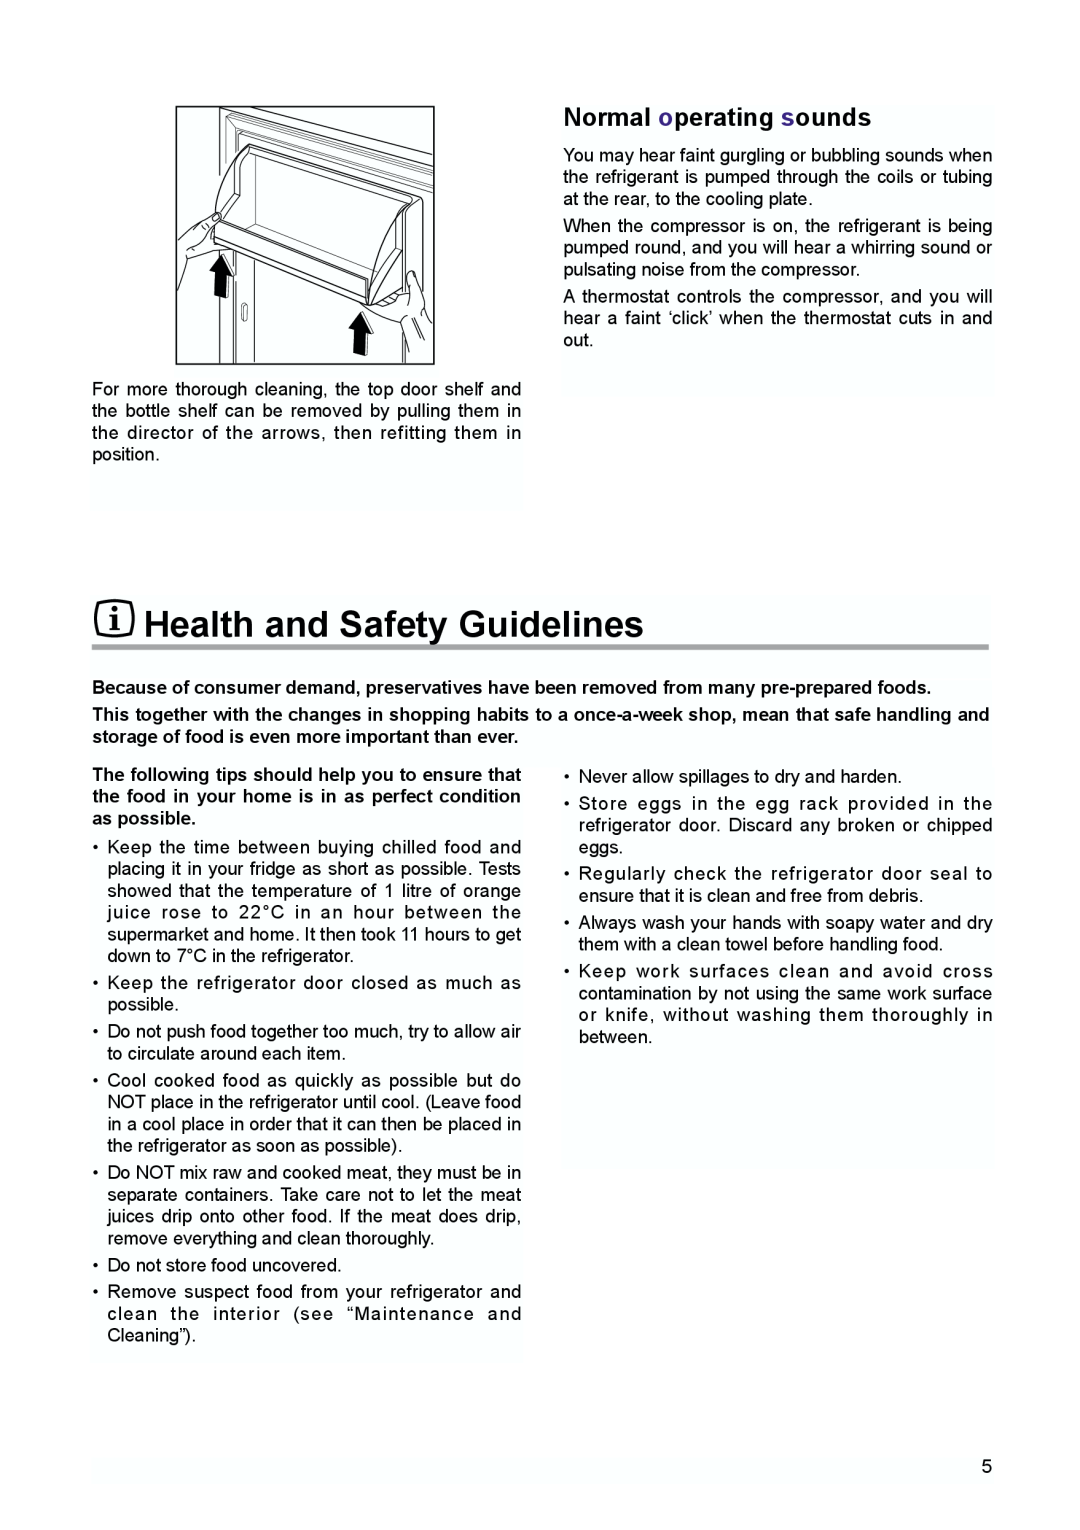 Zanussi Refrigerator, 338, ZI 9155 A, ZI 9225 A manual Health and Safety Guidelines, Normal operating sounds 